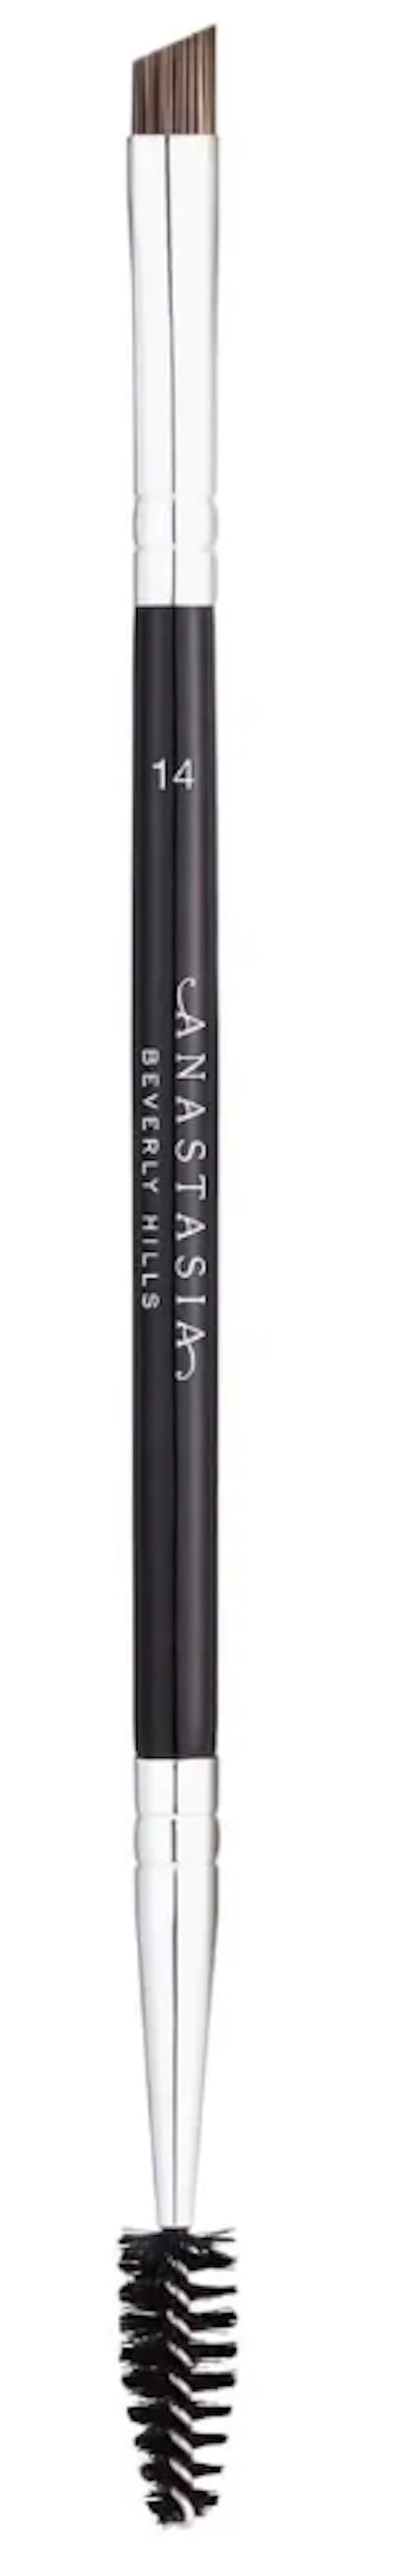 Anastasia Beverly Hills #14 Duo Brow/Eye Liner Angled Cut/ Spooley Synthetic Brush for makeup brush